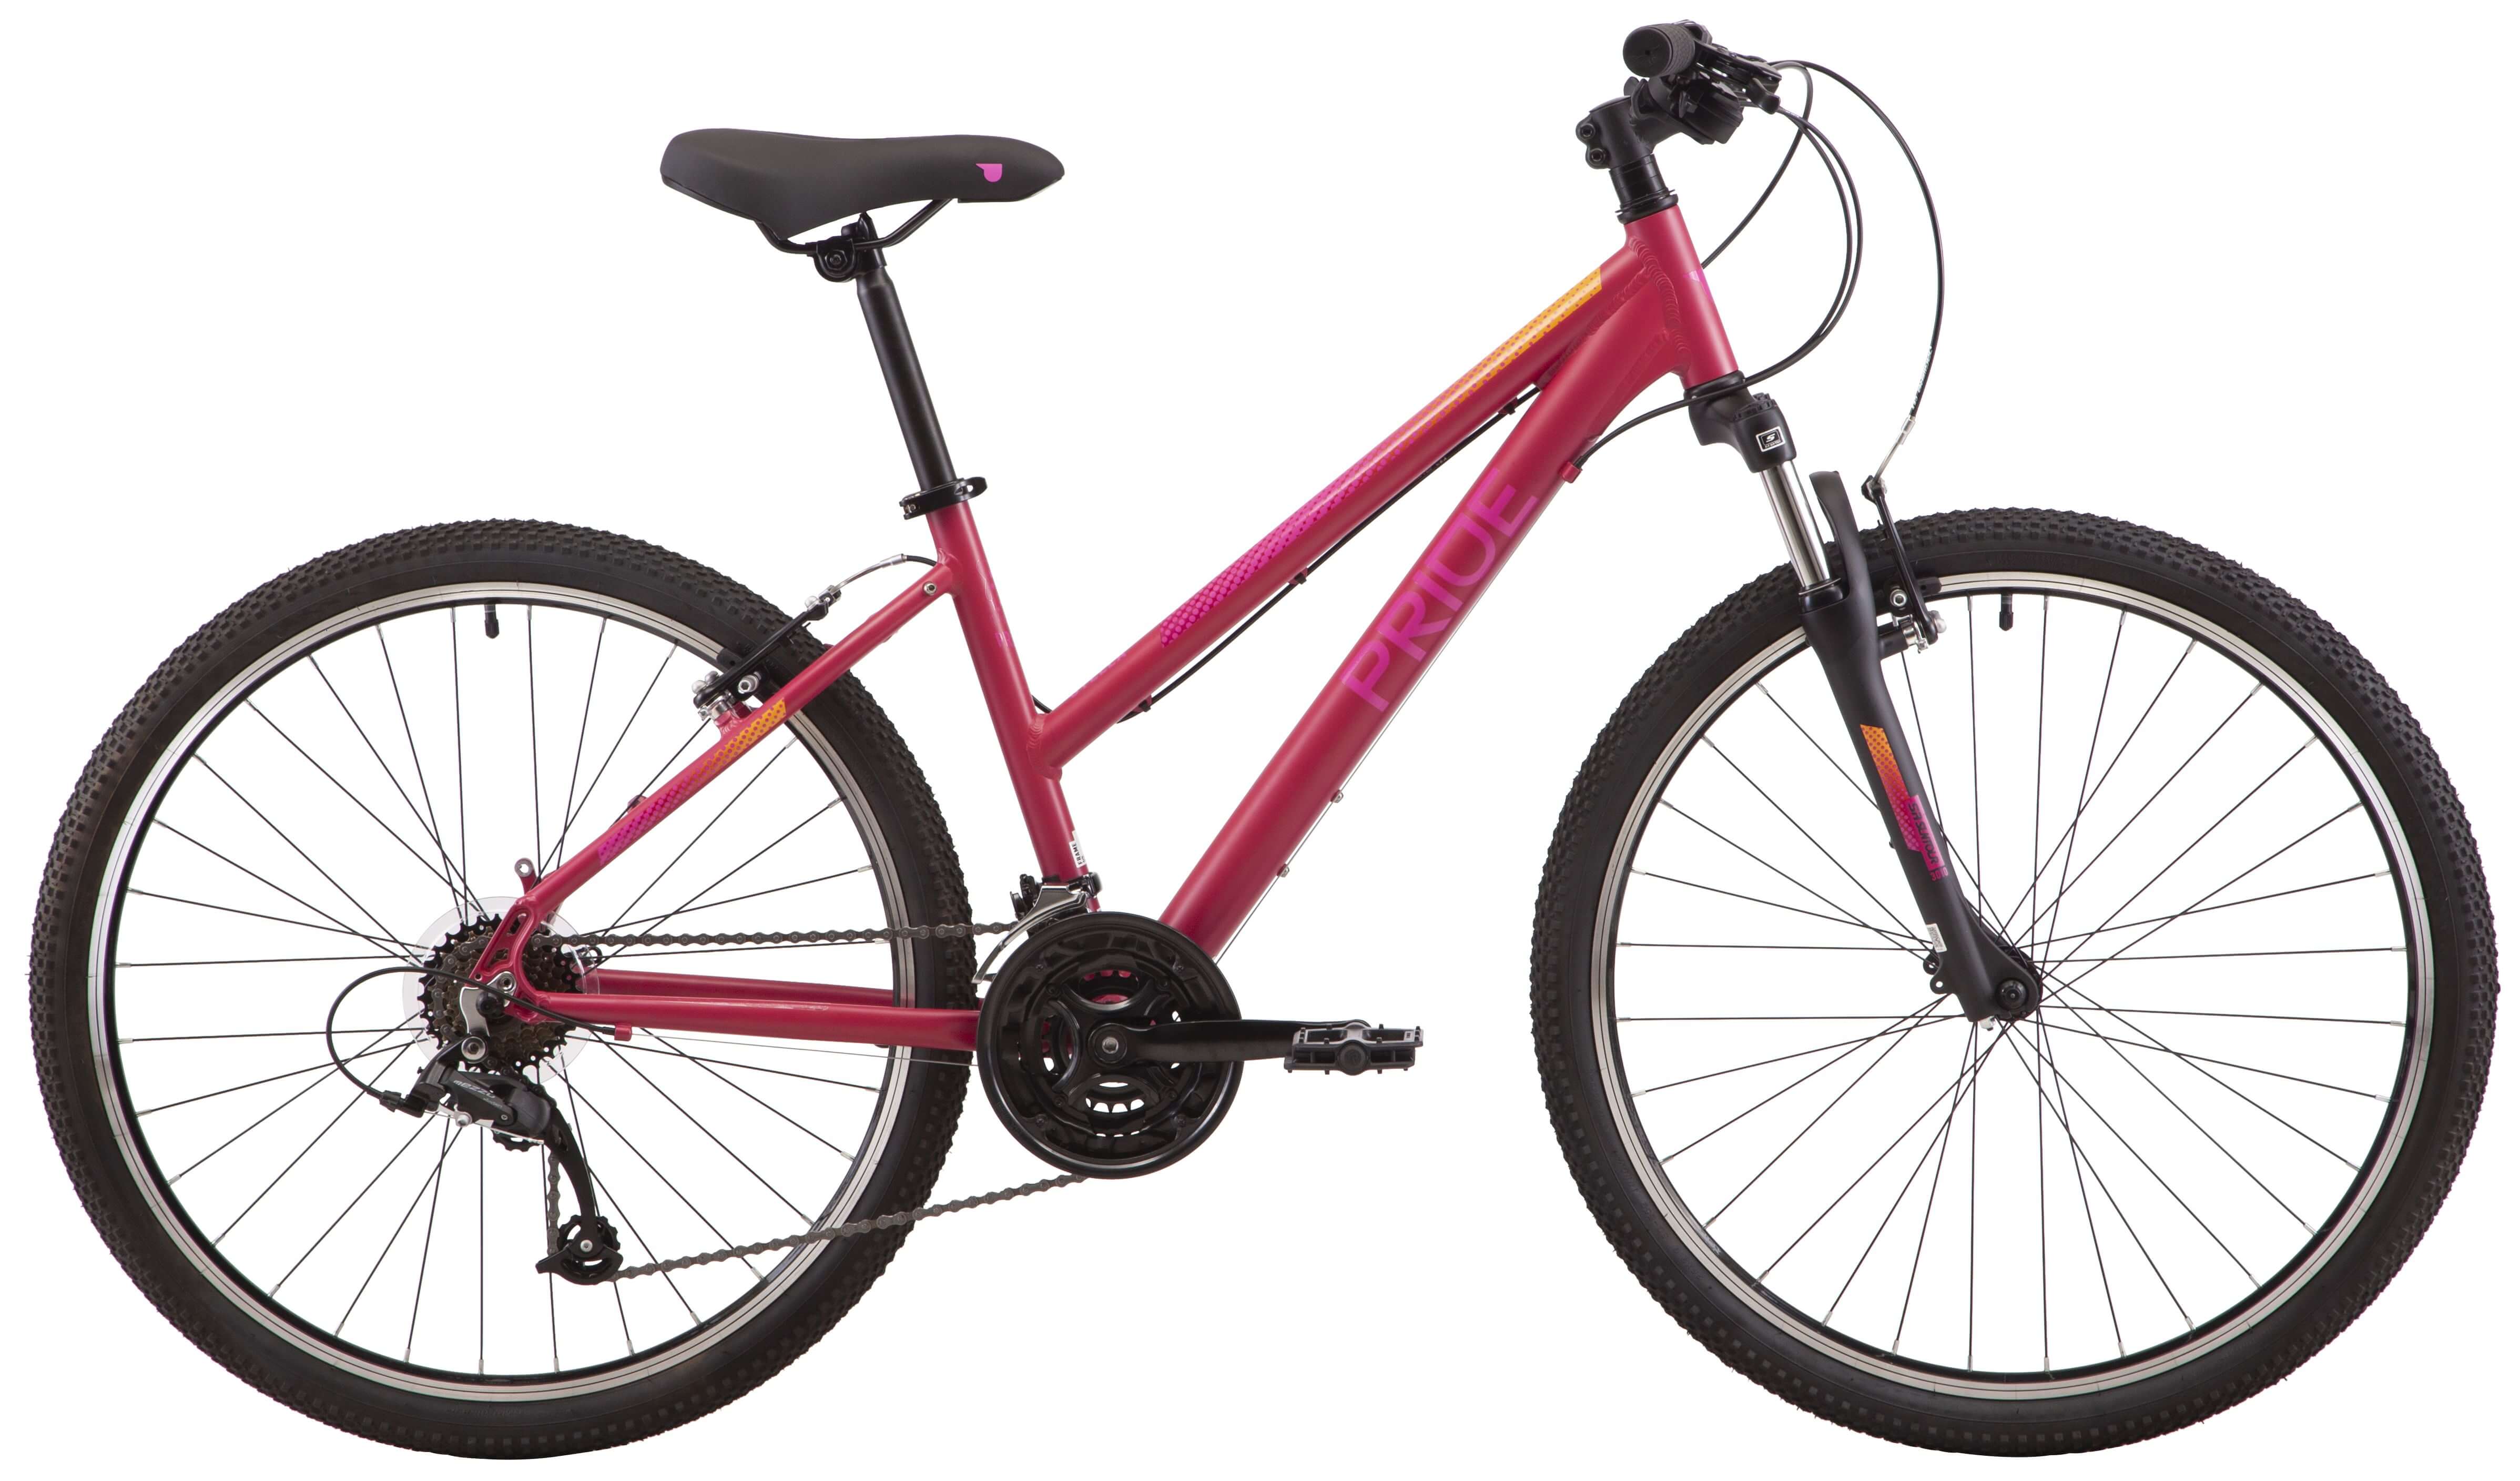 26" Pride Stella 6.1 frame - L 2022 burgundy (rear and front switches and tamnet - Microshift) Photo